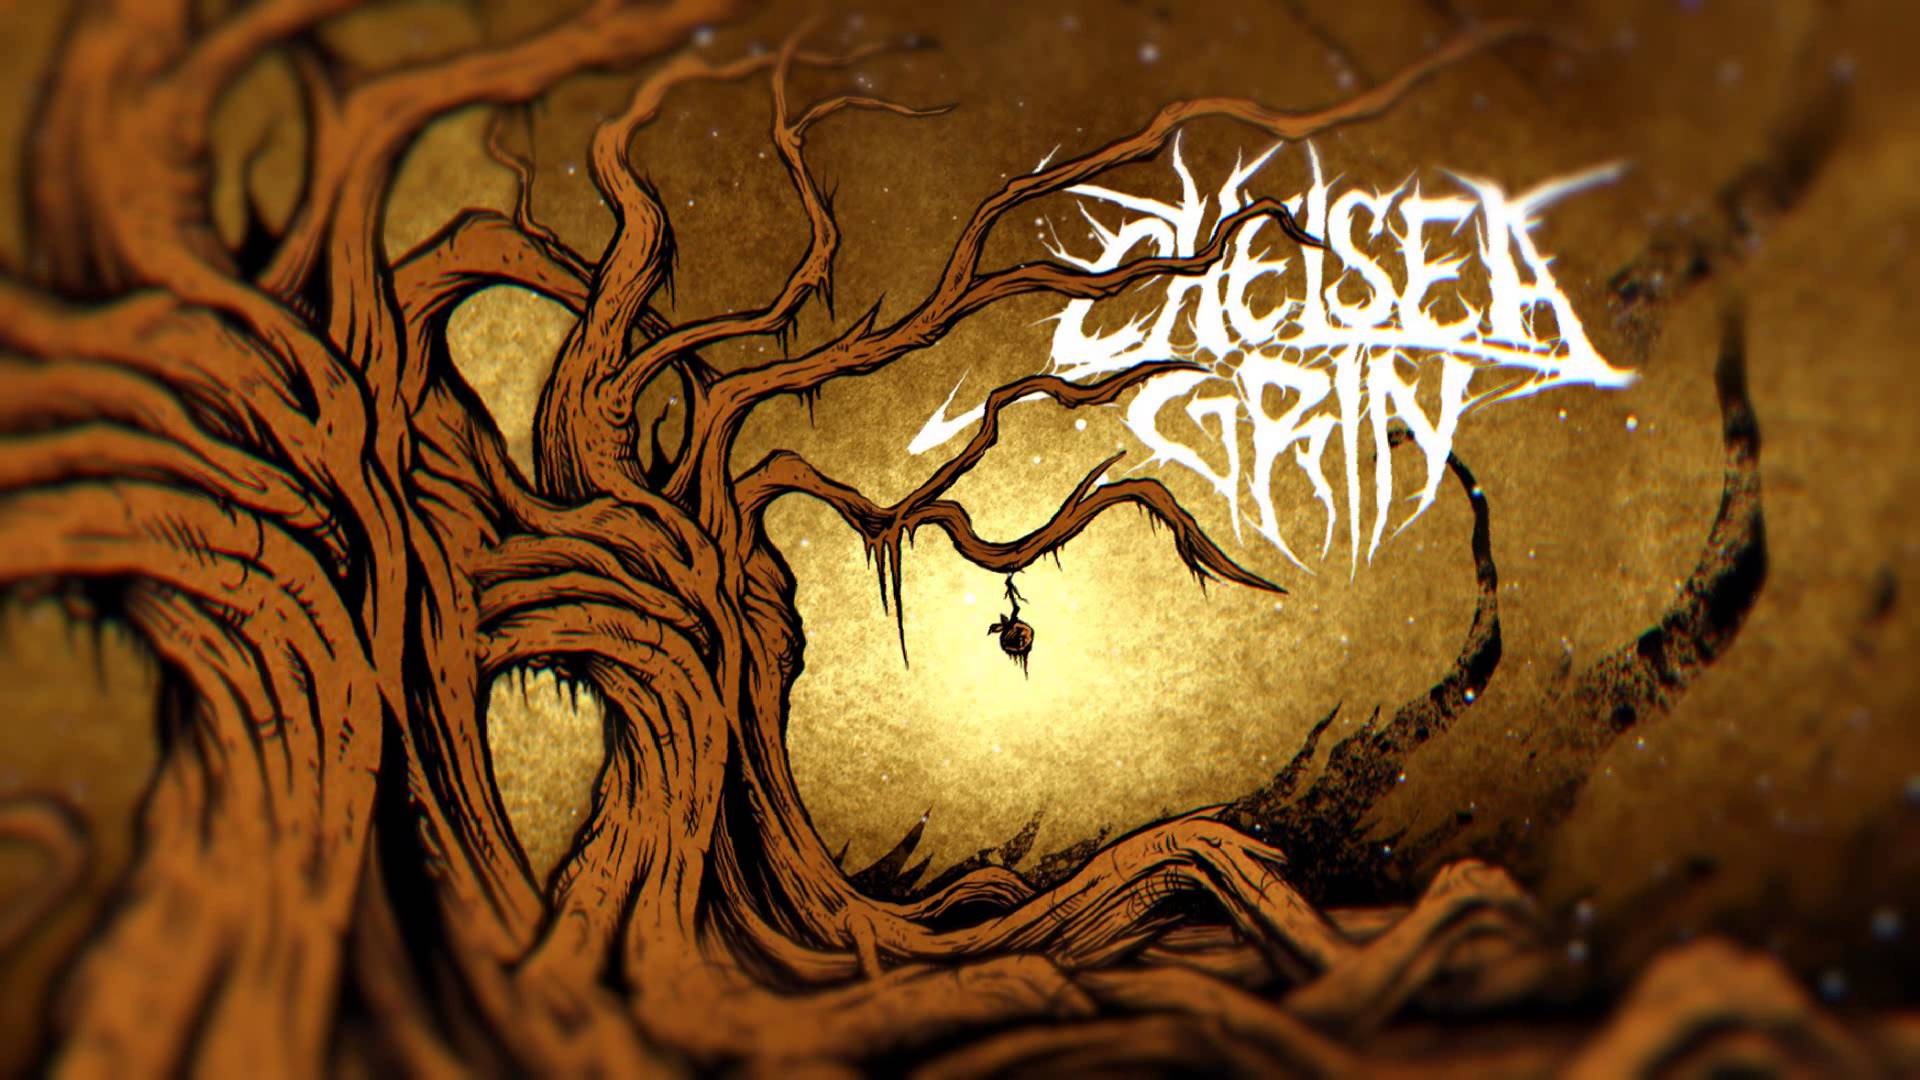 Ing Gallery For Chelsea Grin Band Wallpaper